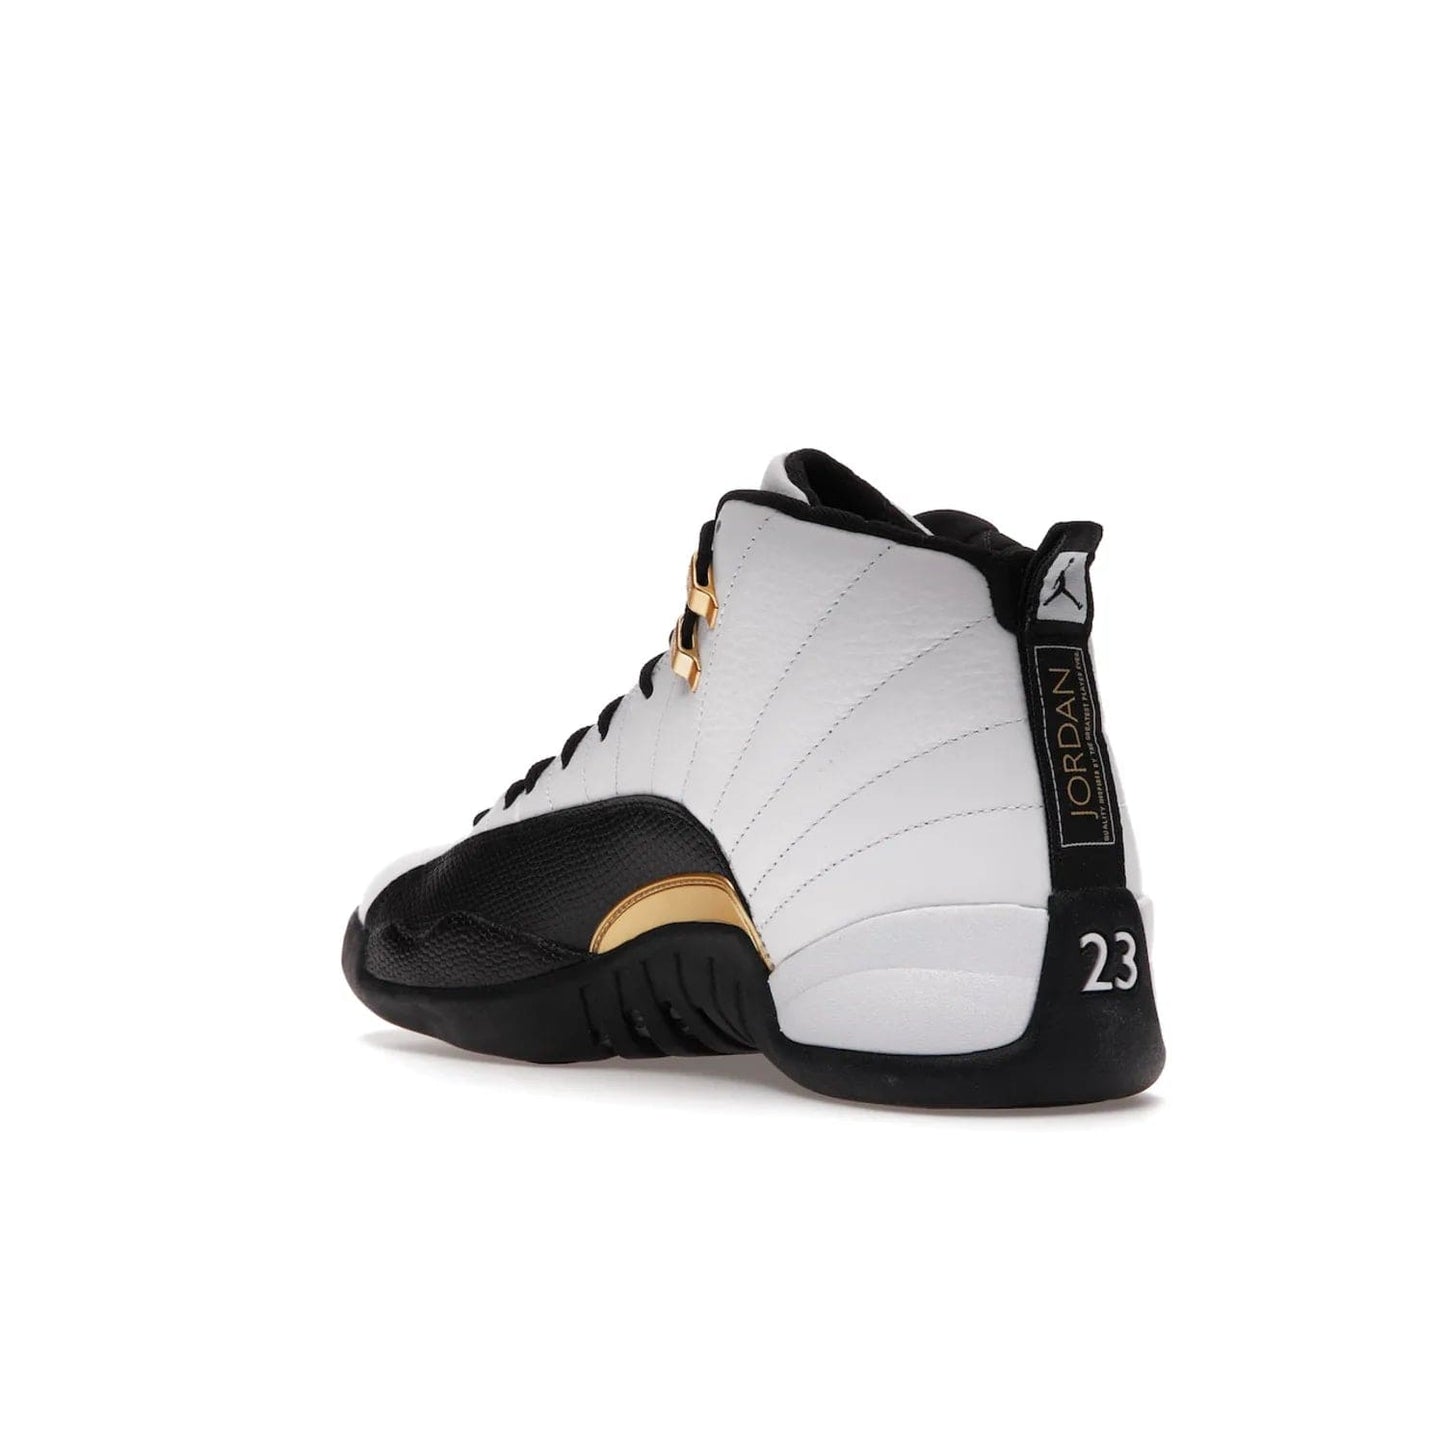 Jordan 12 Retro Royalty Taxi - Image 24 - Only at www.BallersClubKickz.com - Make a statement with the Air Jordan 12 Retro Royalty Taxi. Woven heel tag, gold plaquet, white tumbled leather upper plus a black toe wrap, make this modern take on the classic a must-have. Available in November 2021.